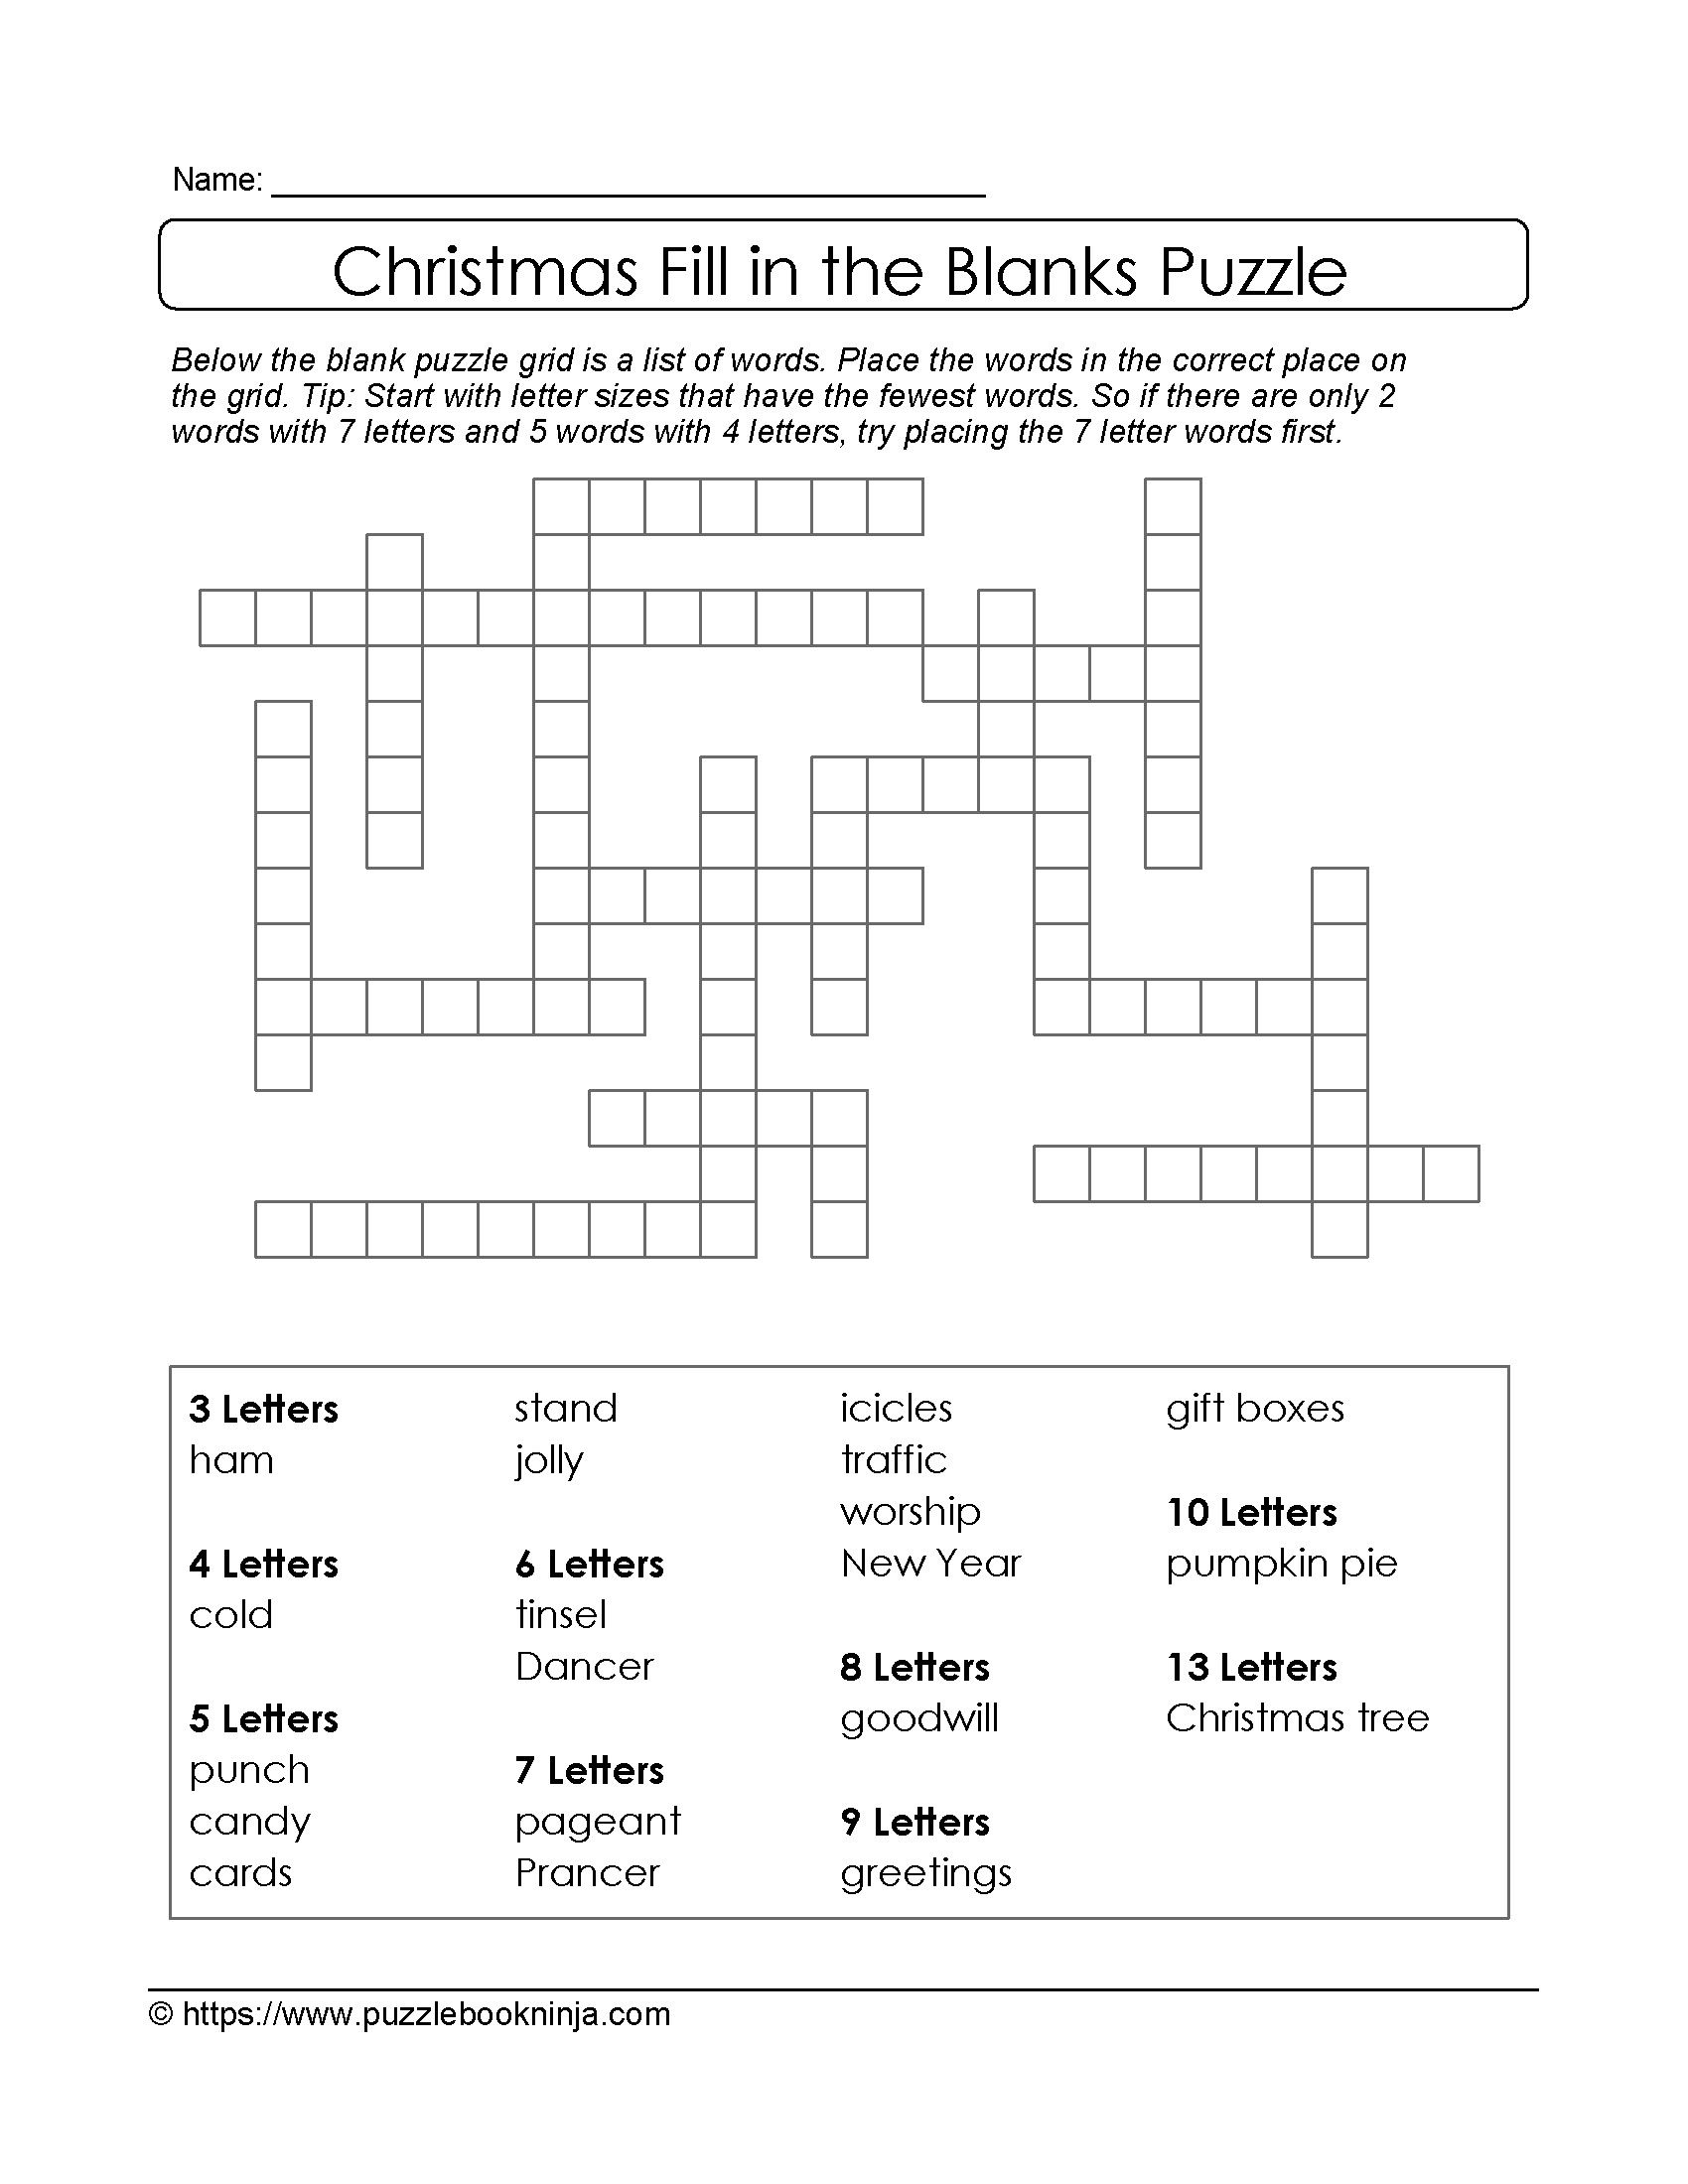 Freebie Xmas Puzzle To Print. Fill In The Blanks Crossword Like - Blank Crossword Puzzle Grids Printable